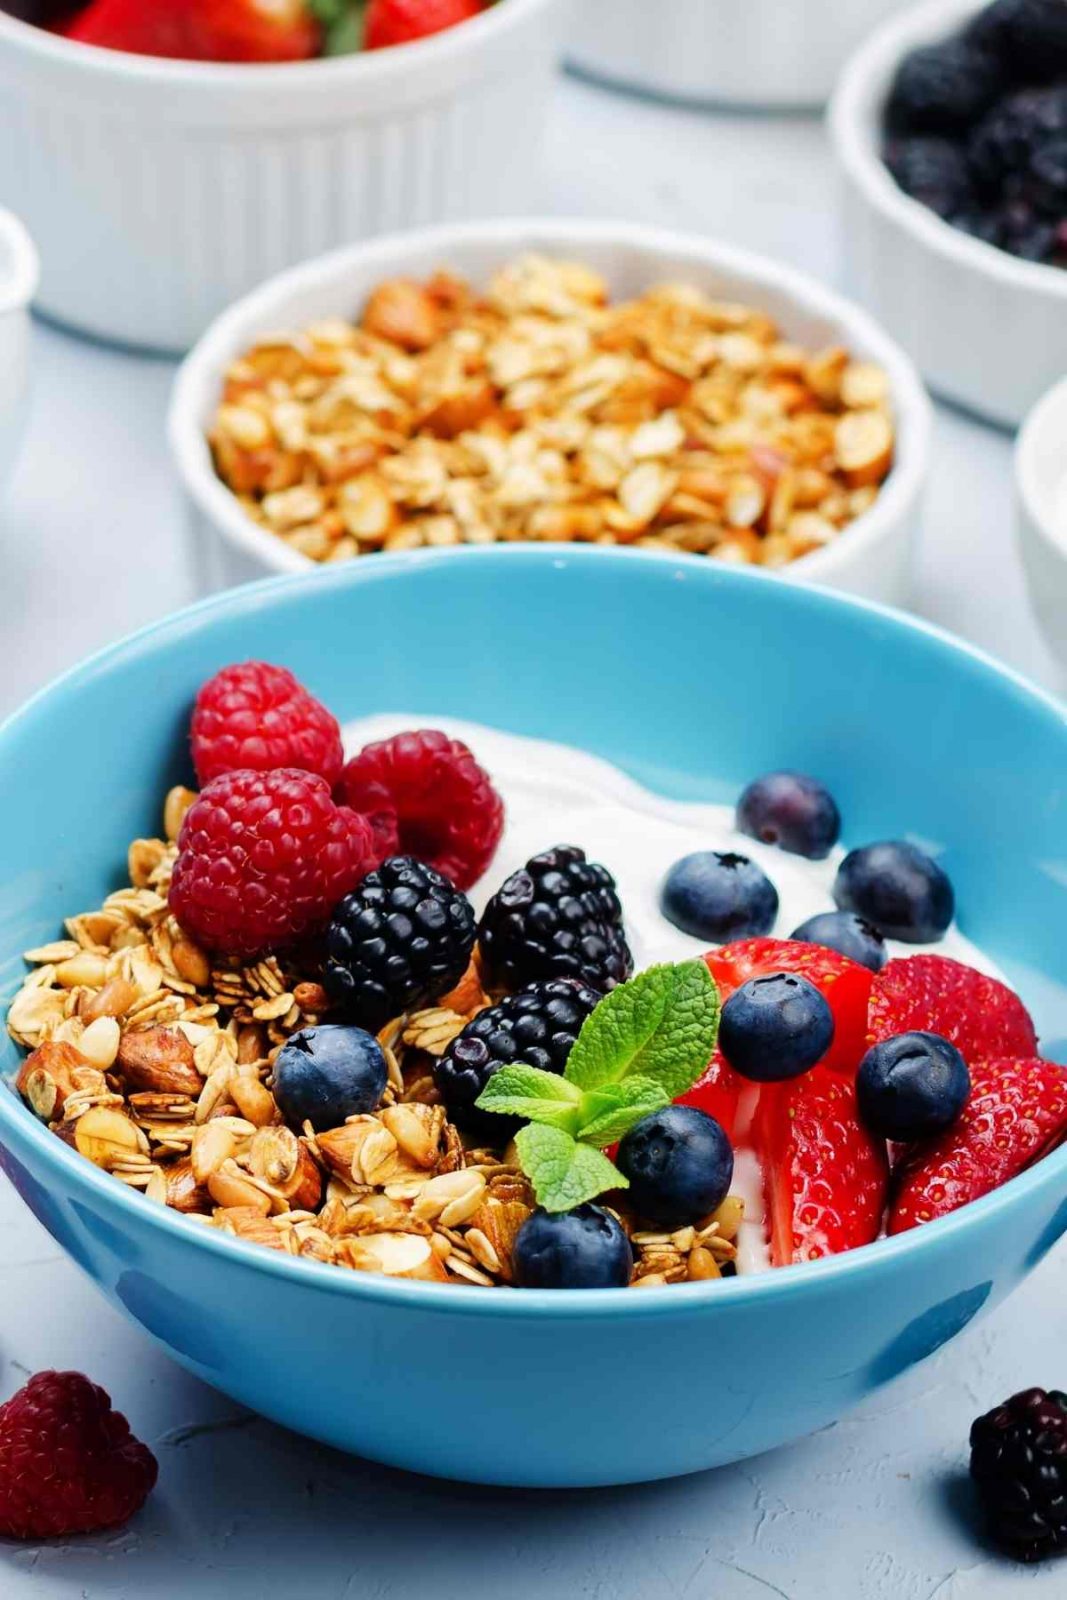 Getting your day off to a healthy start isn’t always easy but this yogurt and granola bowl is about to change that. Start your day with plenty of nutrients and great flavor with this recipe. Adding granola to your usual yogurt and fruit can make your breakfast heartier and tastier.